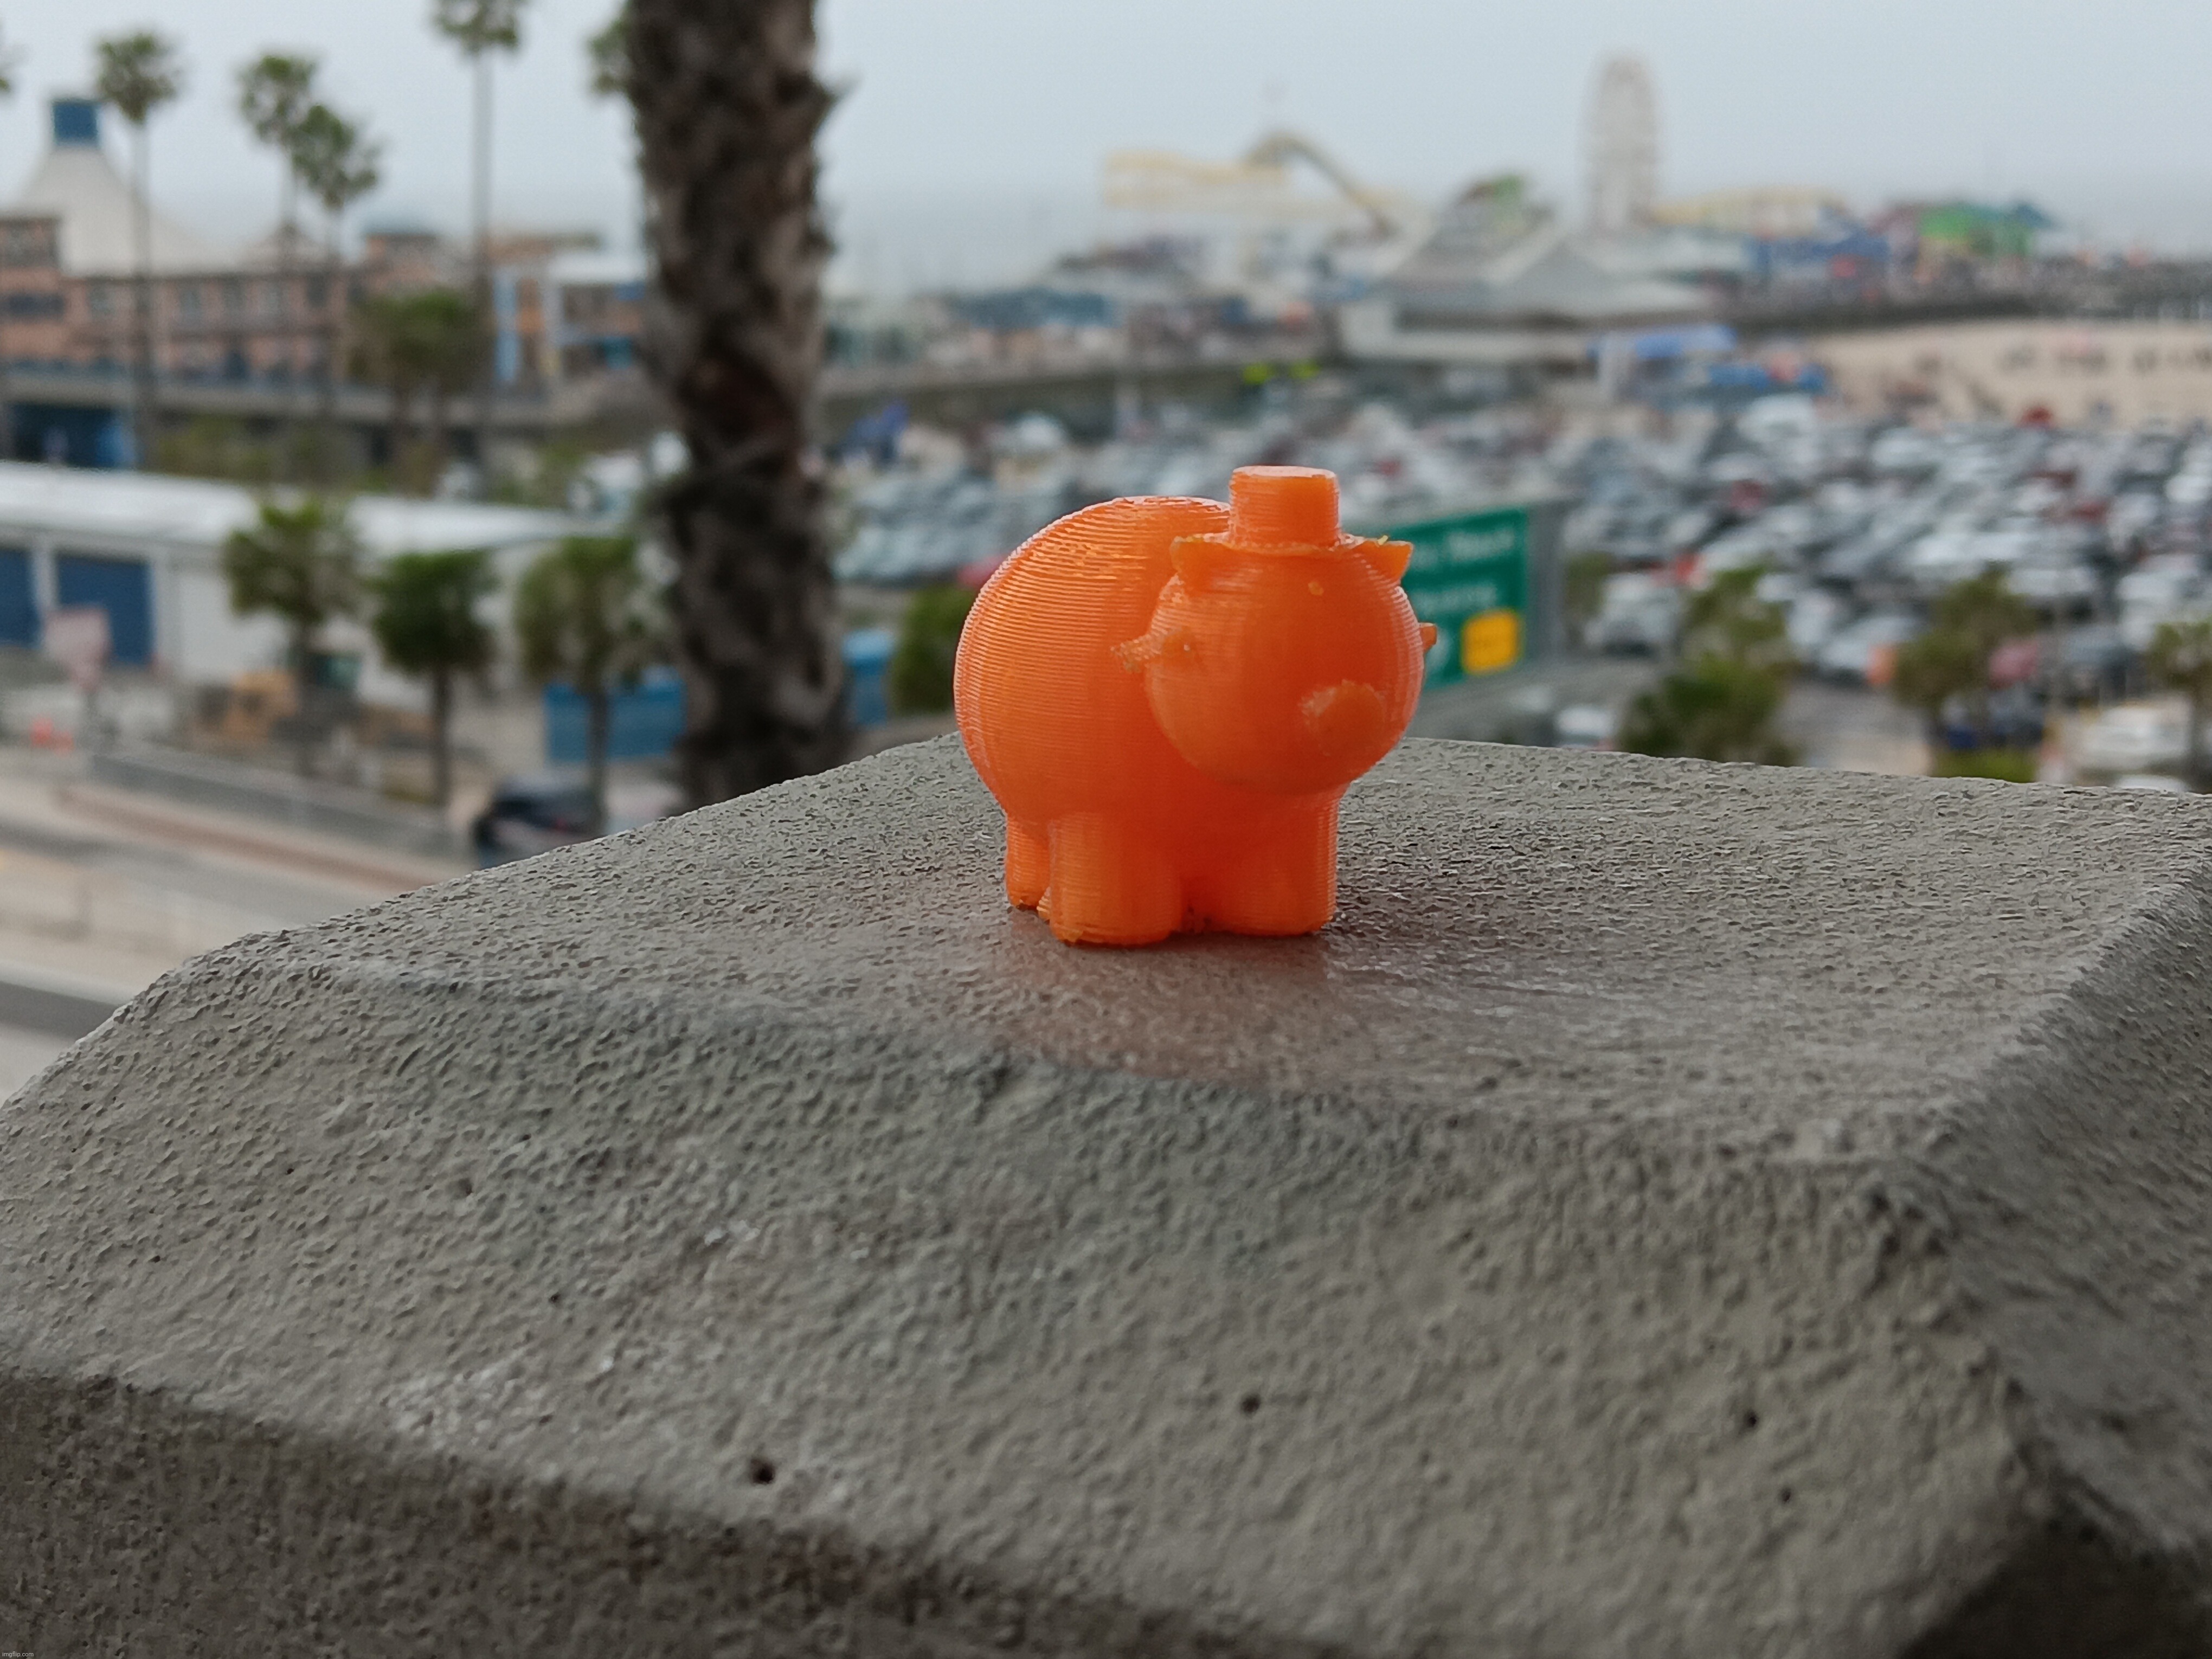 This is Mr pig the 3d model pig oc say hi to him | image tagged in oc | made w/ Imgflip meme maker